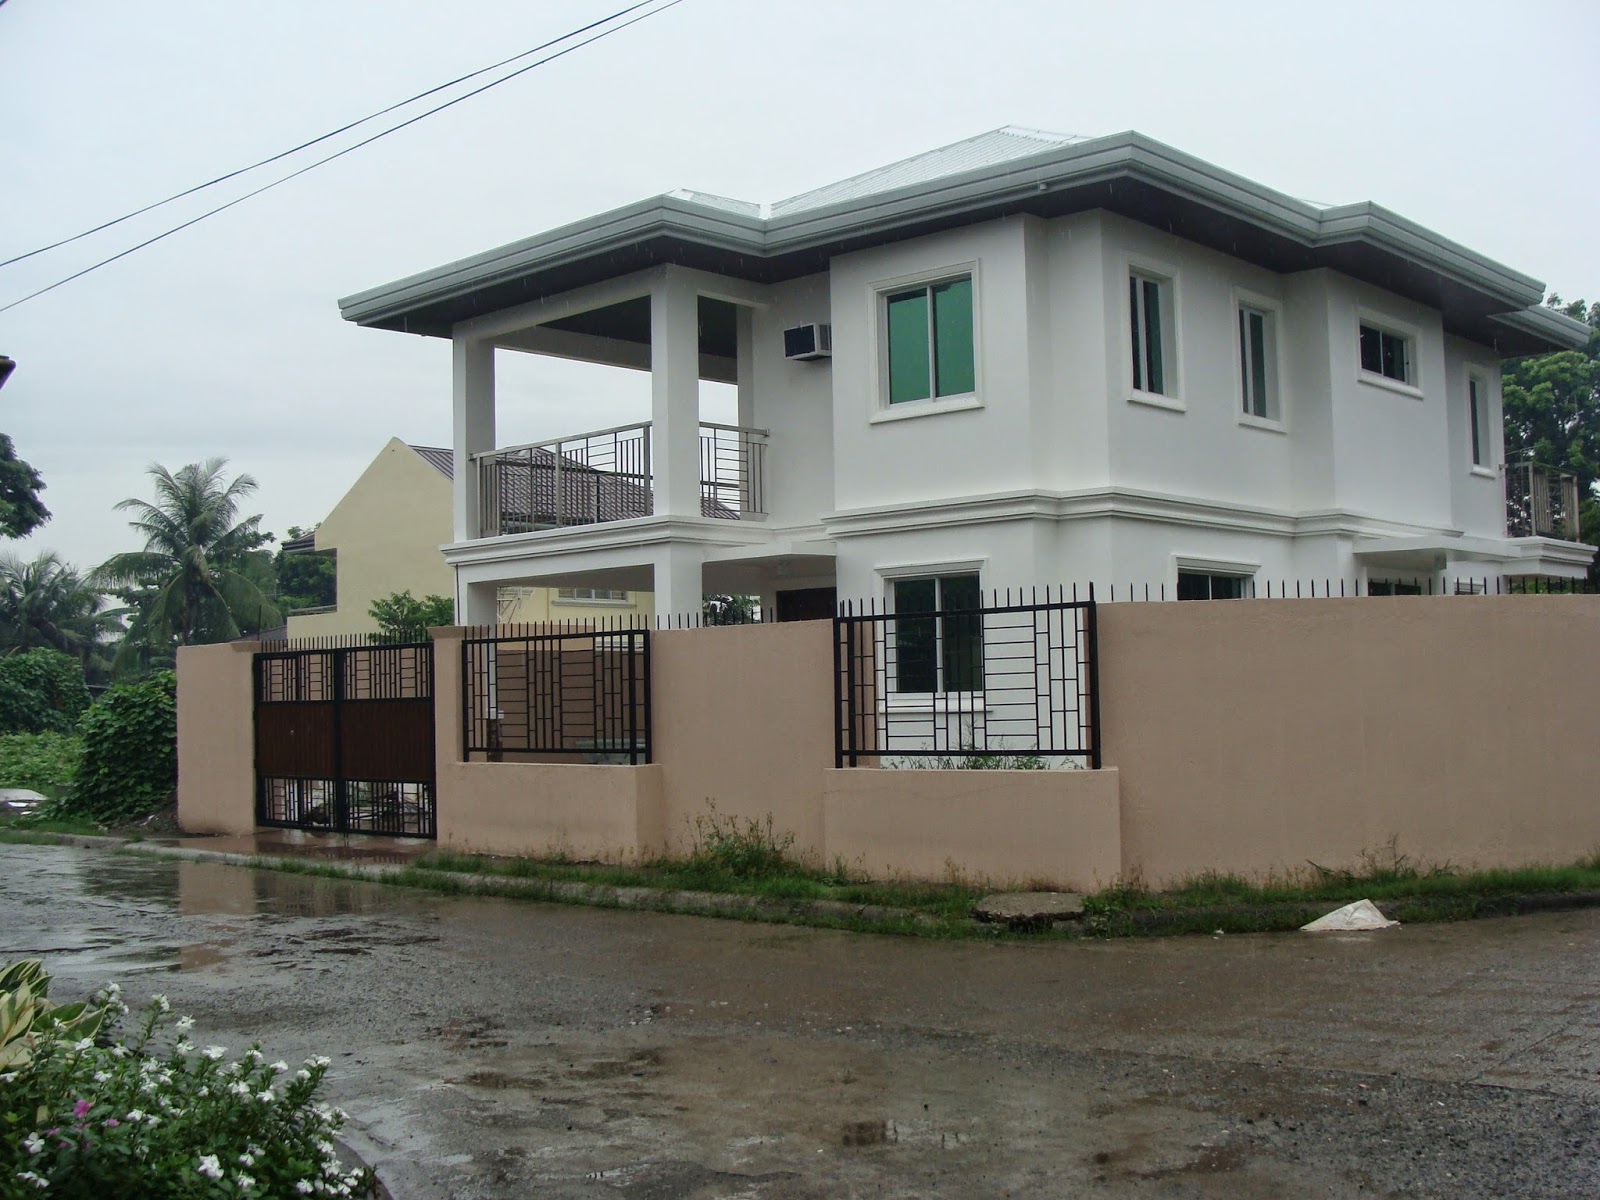 2 Storey Modern Small Houses With Gate Of Philippines – Modern House